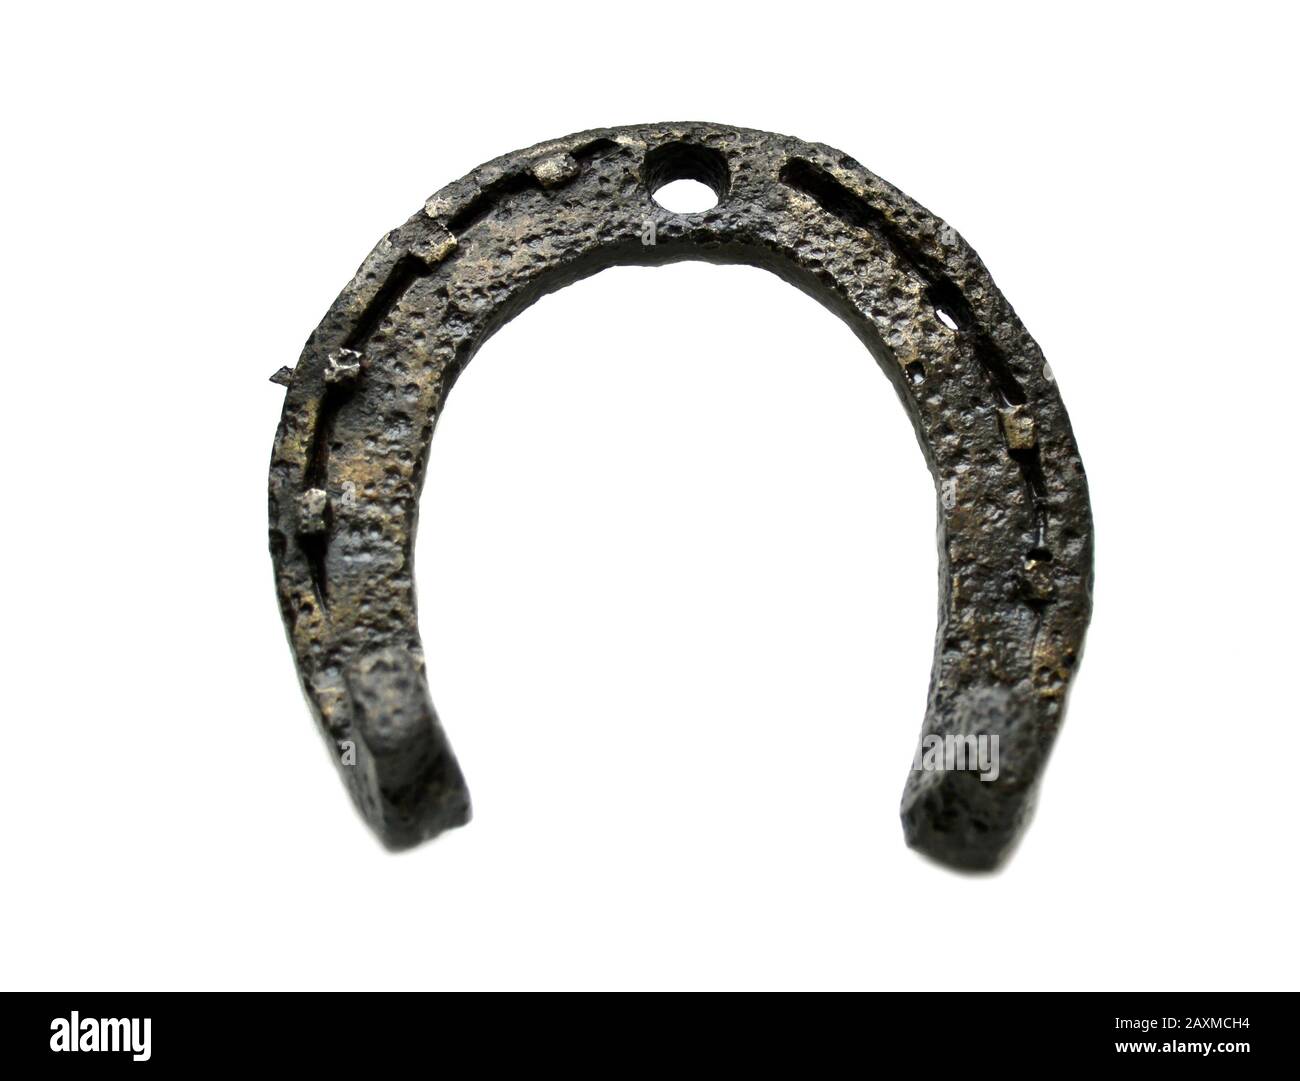 historical and ancient metal horseshoe on a white background Stock Photo